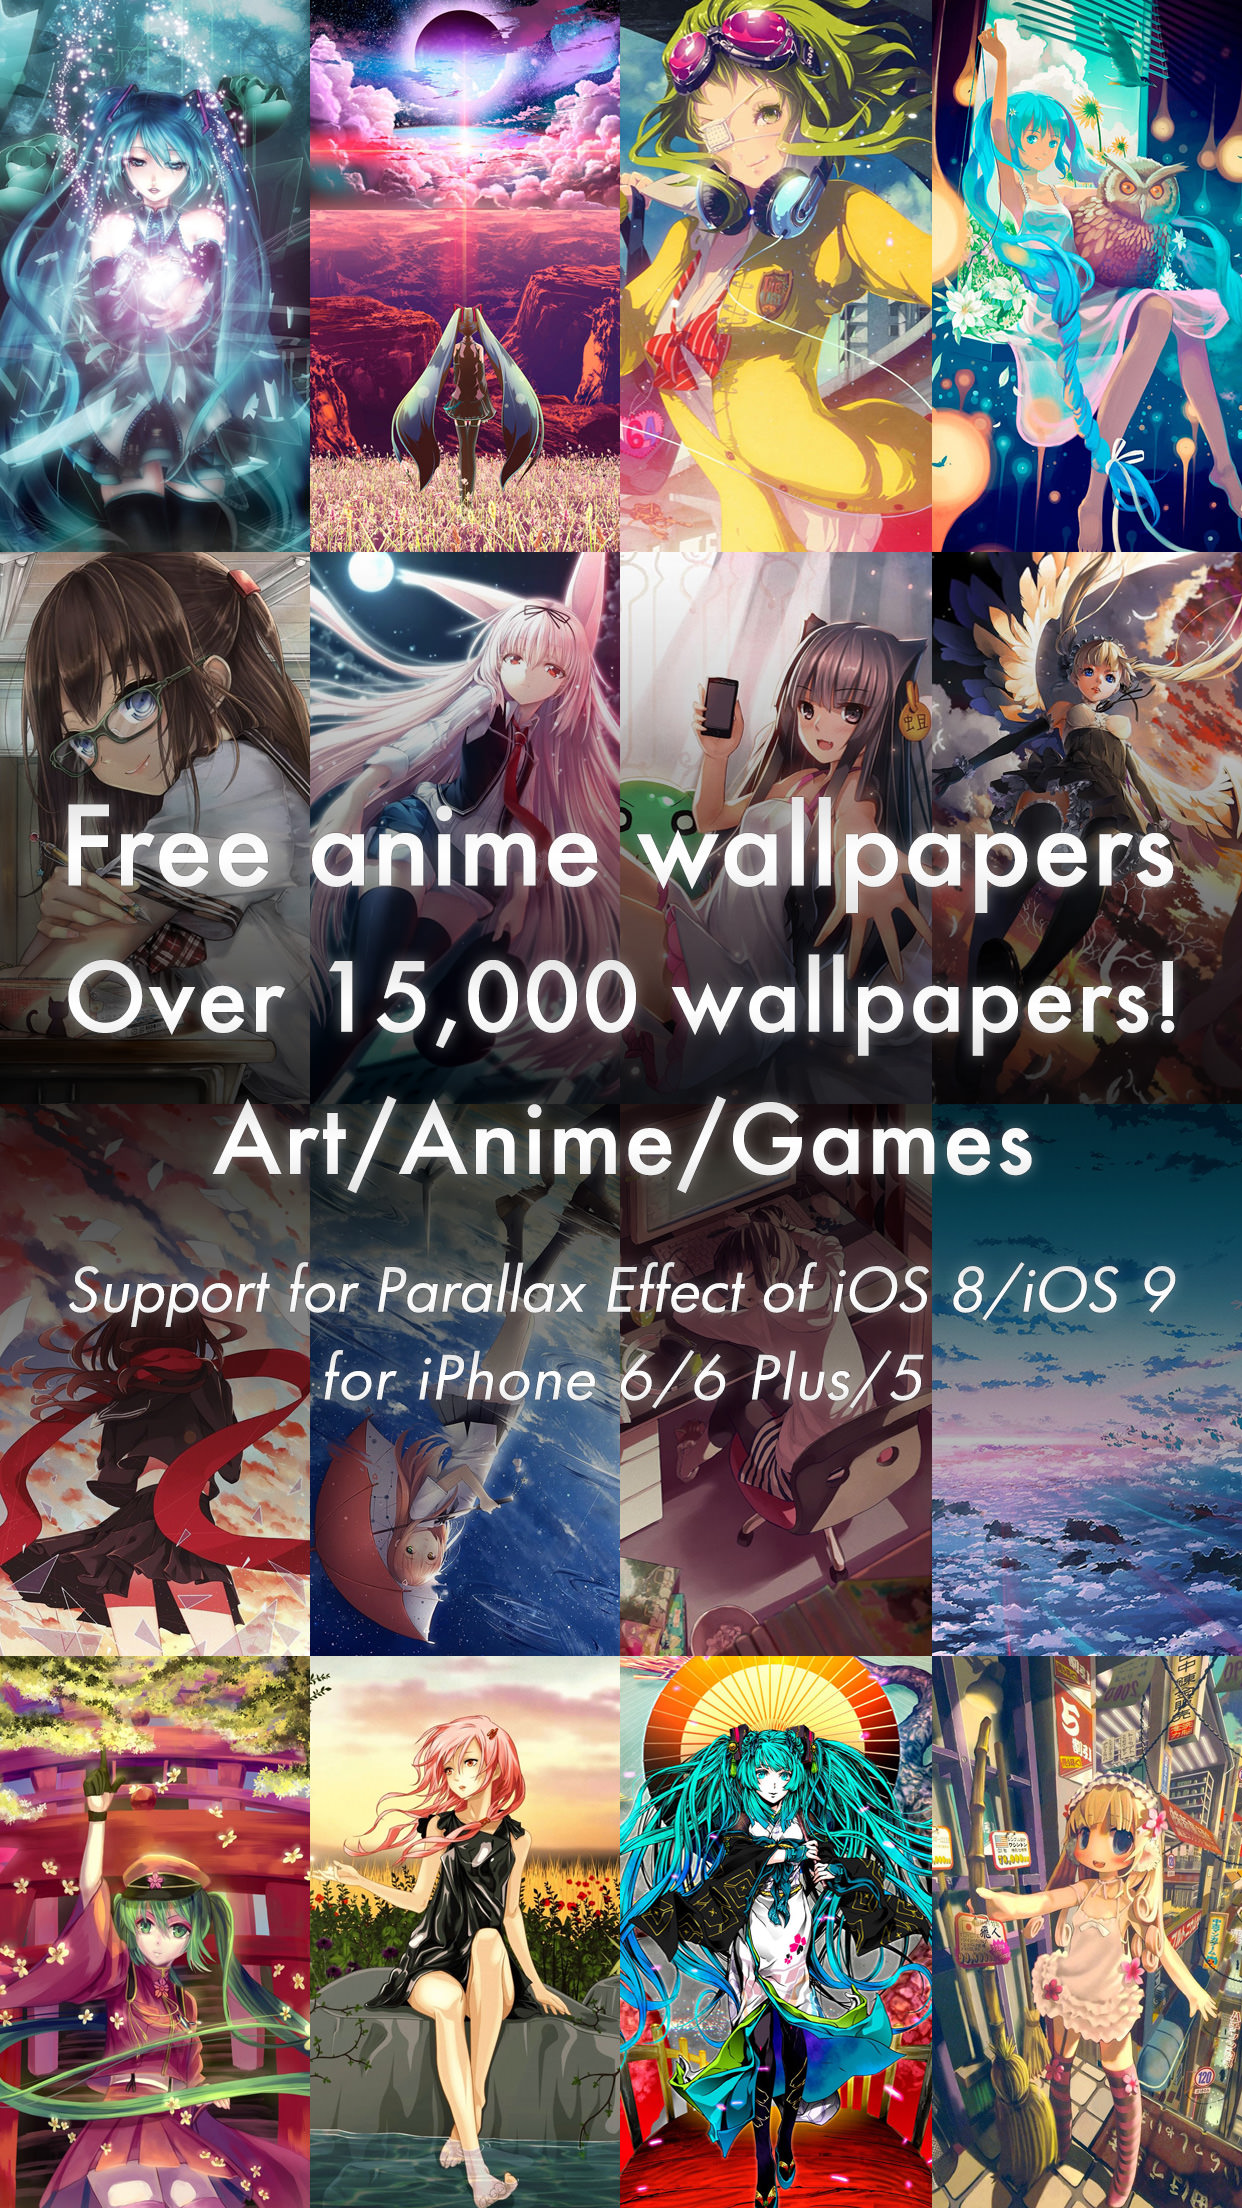 The Anime Wallpapers 4000 sheets app is a beautiful offering that